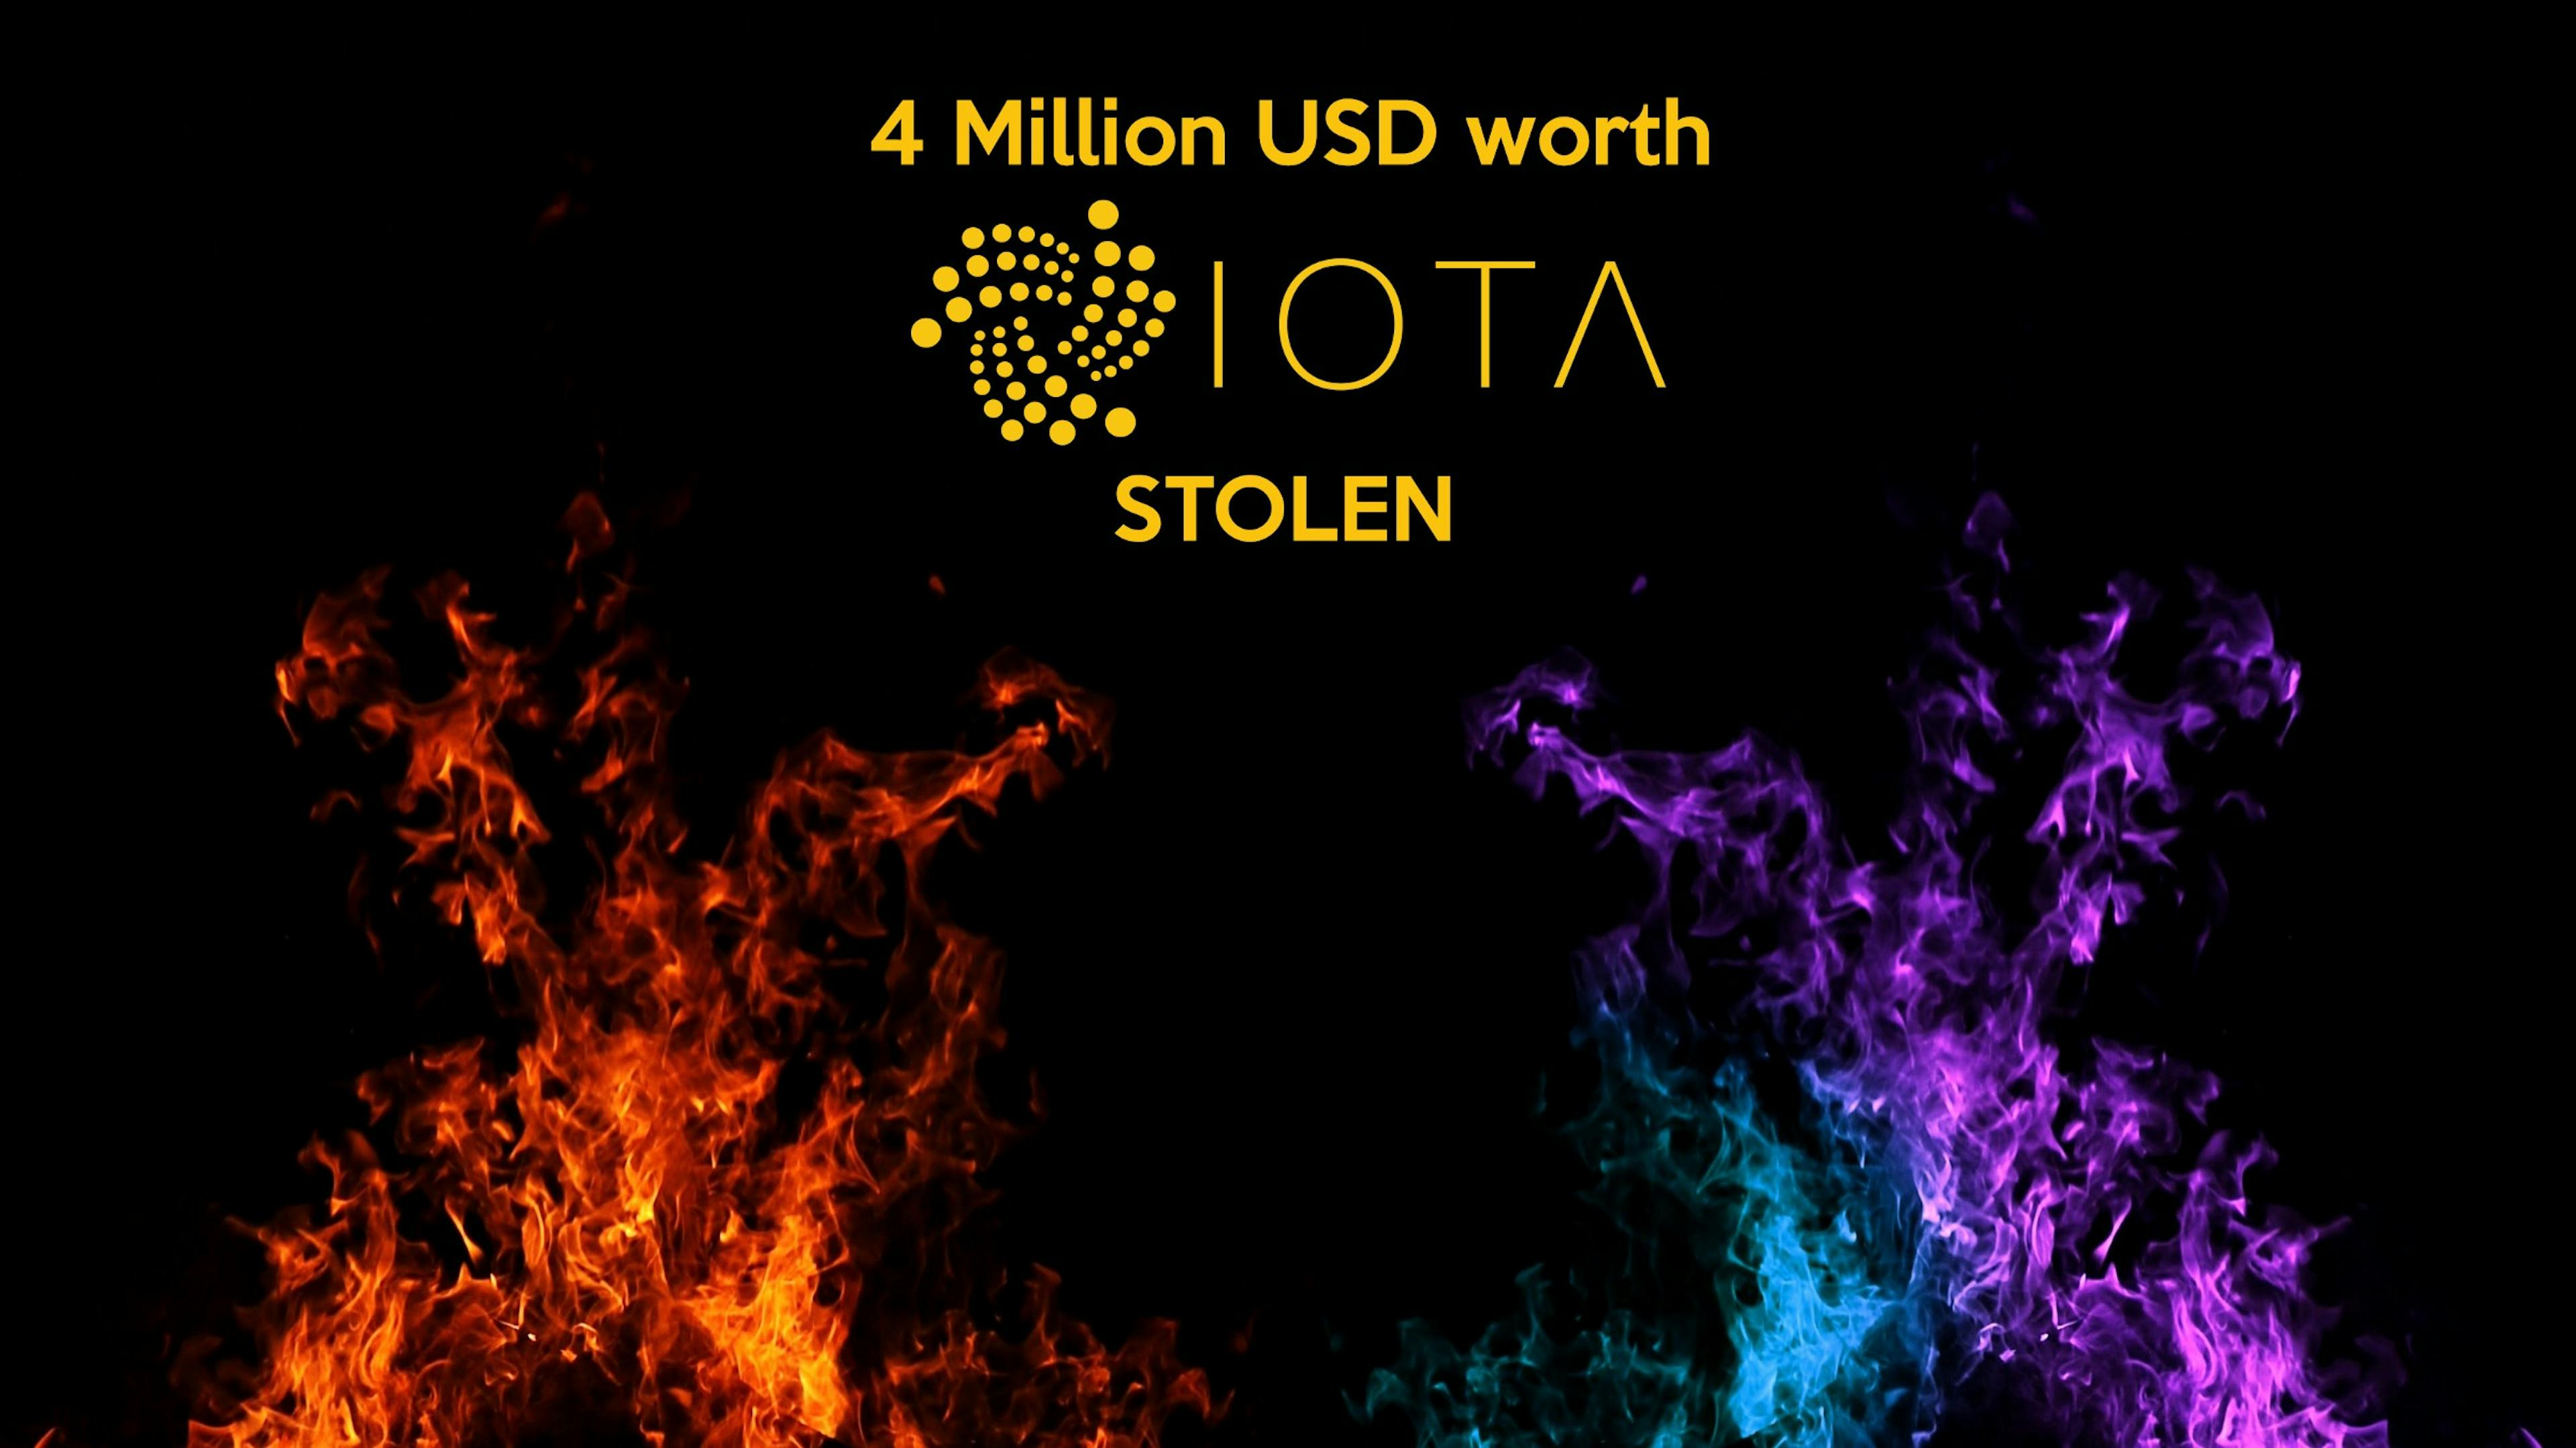 featured image - Missing IOTA in wallet? Read this now!